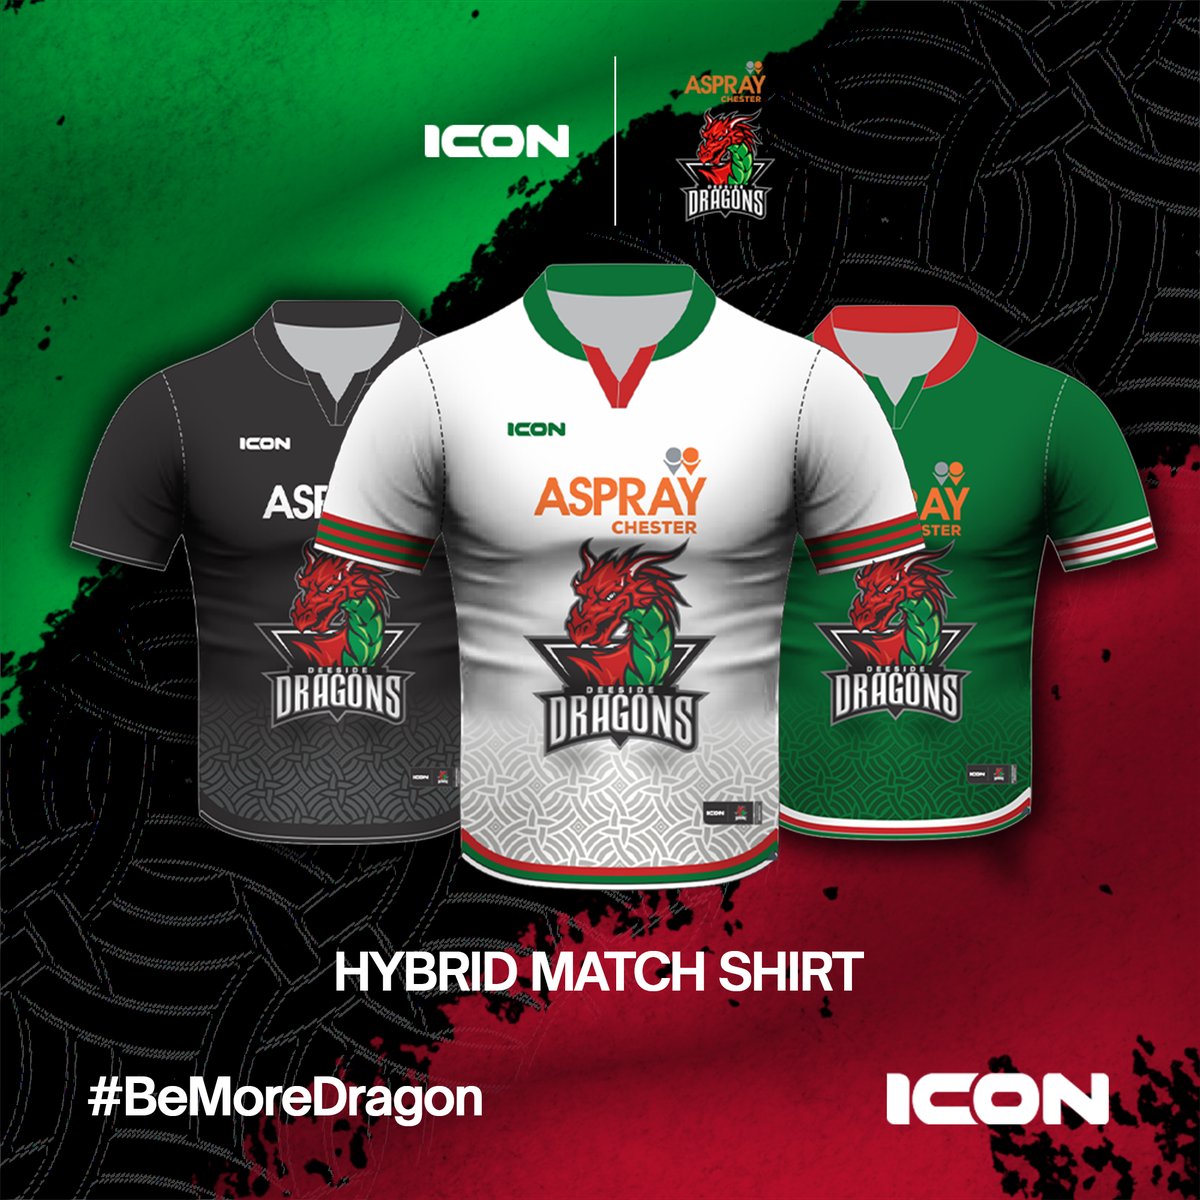 Ready to Be A Dragon? New @dragonsihc Hybrid Match Shirt is now available! 🌟 You still have until midnight on the 5th November to secure your teamwear in time for Christmas ⏰ #iconsports #iconsportsuk #iconsportswales #teamwear #BeMoreDragon